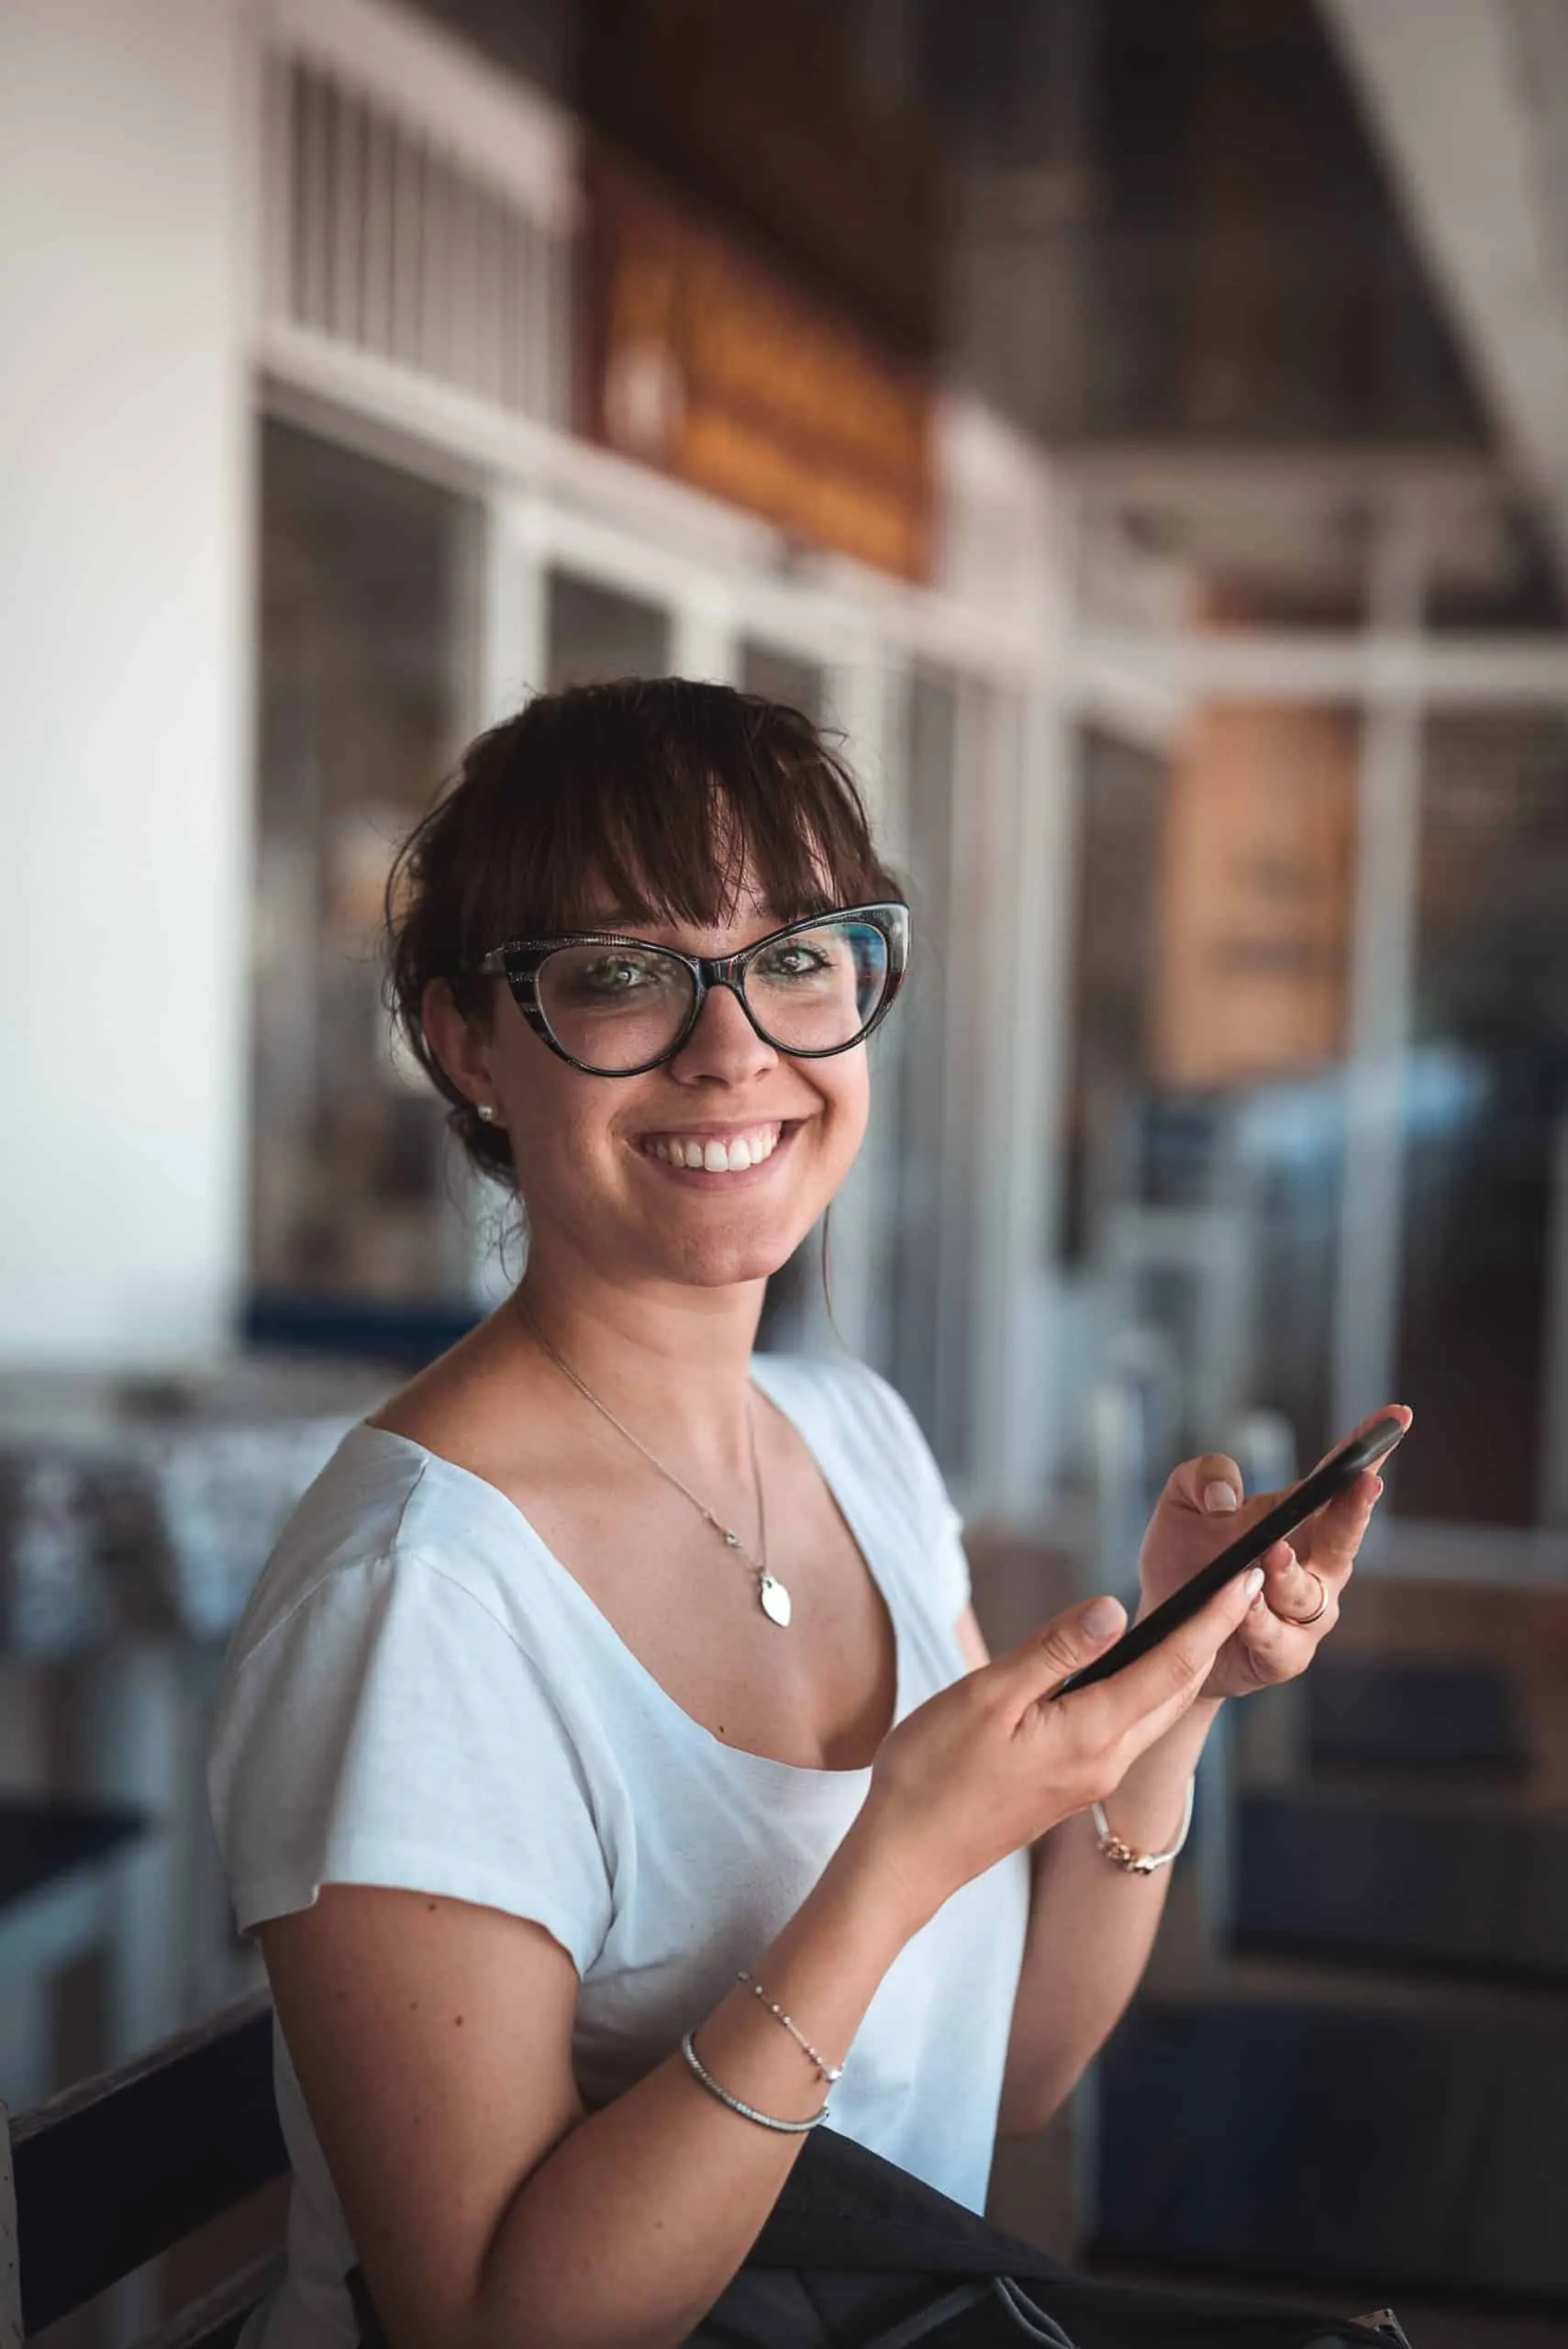 woman smiling using smartphone